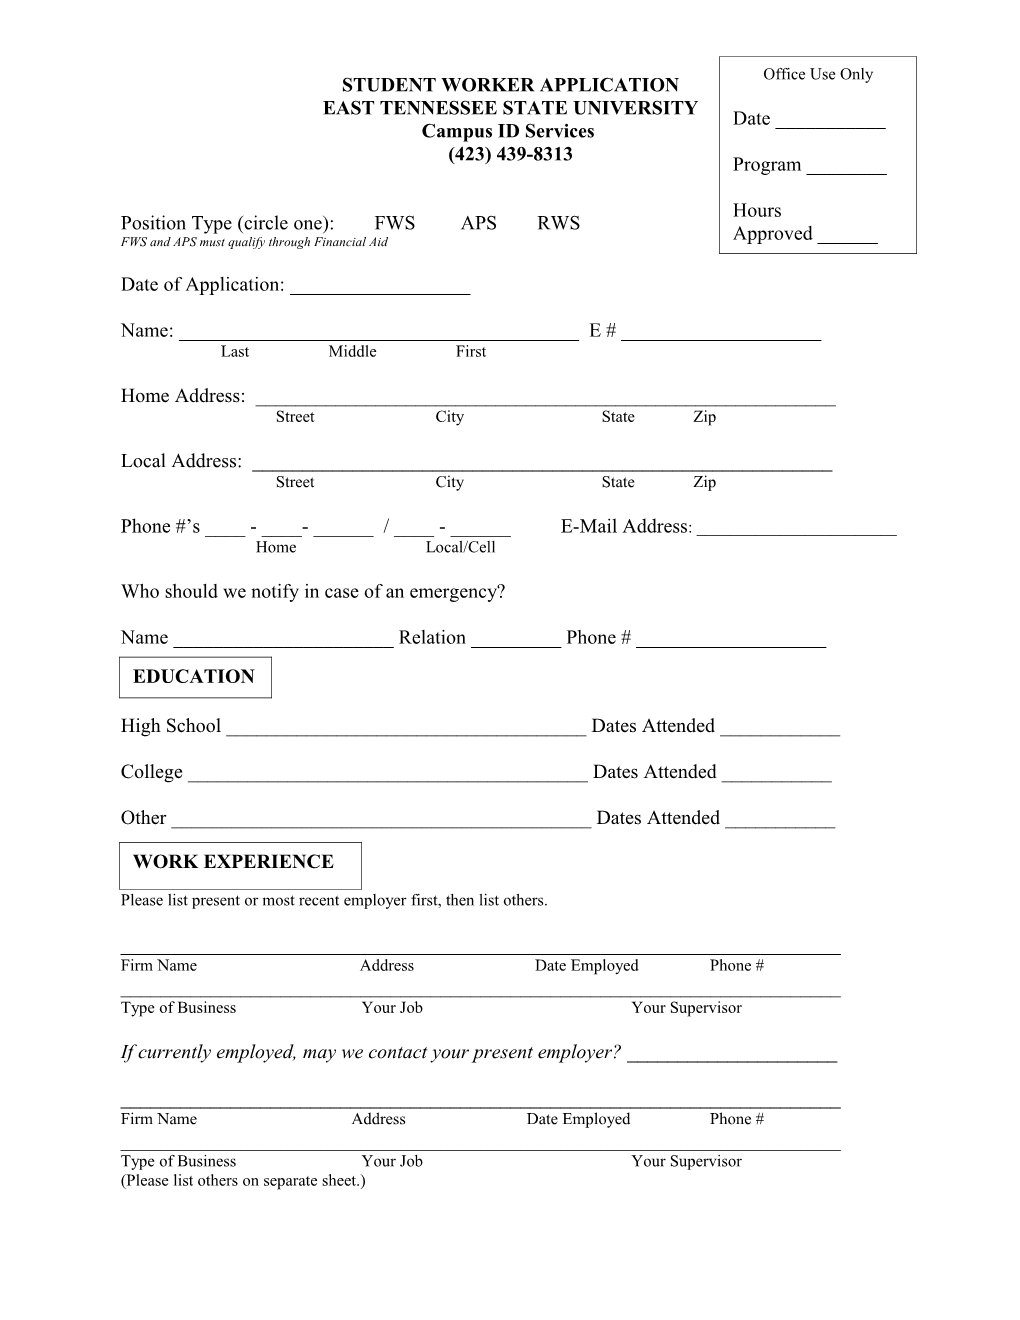 Student Workers Application